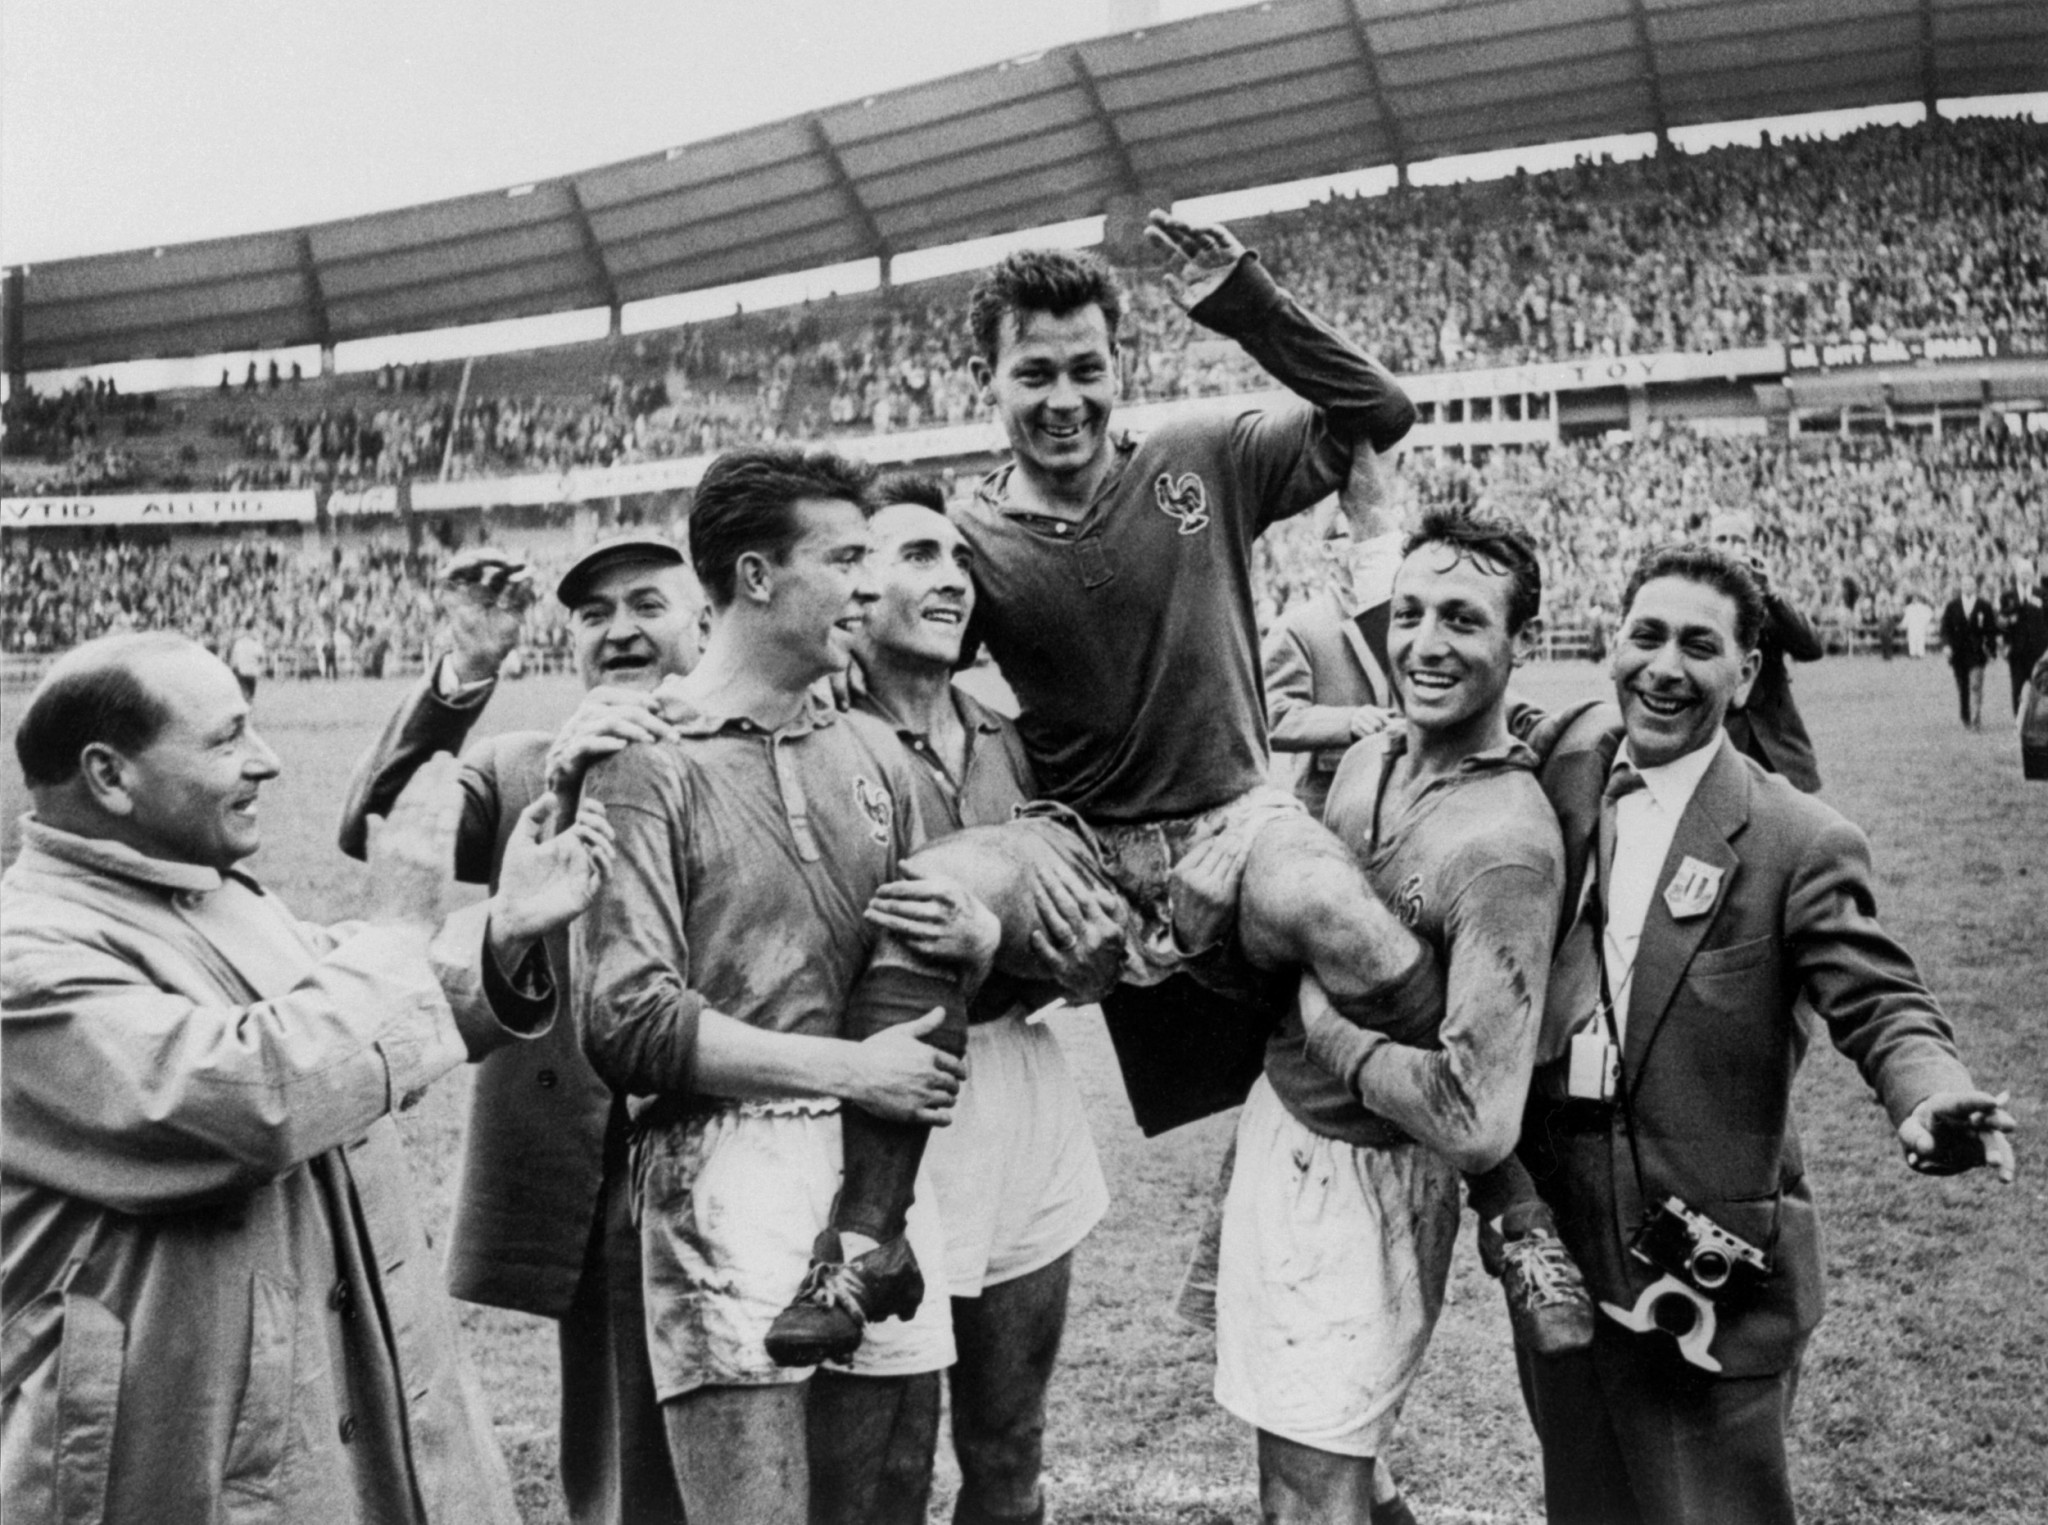 


Moroccan born Just Fontaine, centre, scored 13 goals for France in the 1958 World Cup ©Getty Images